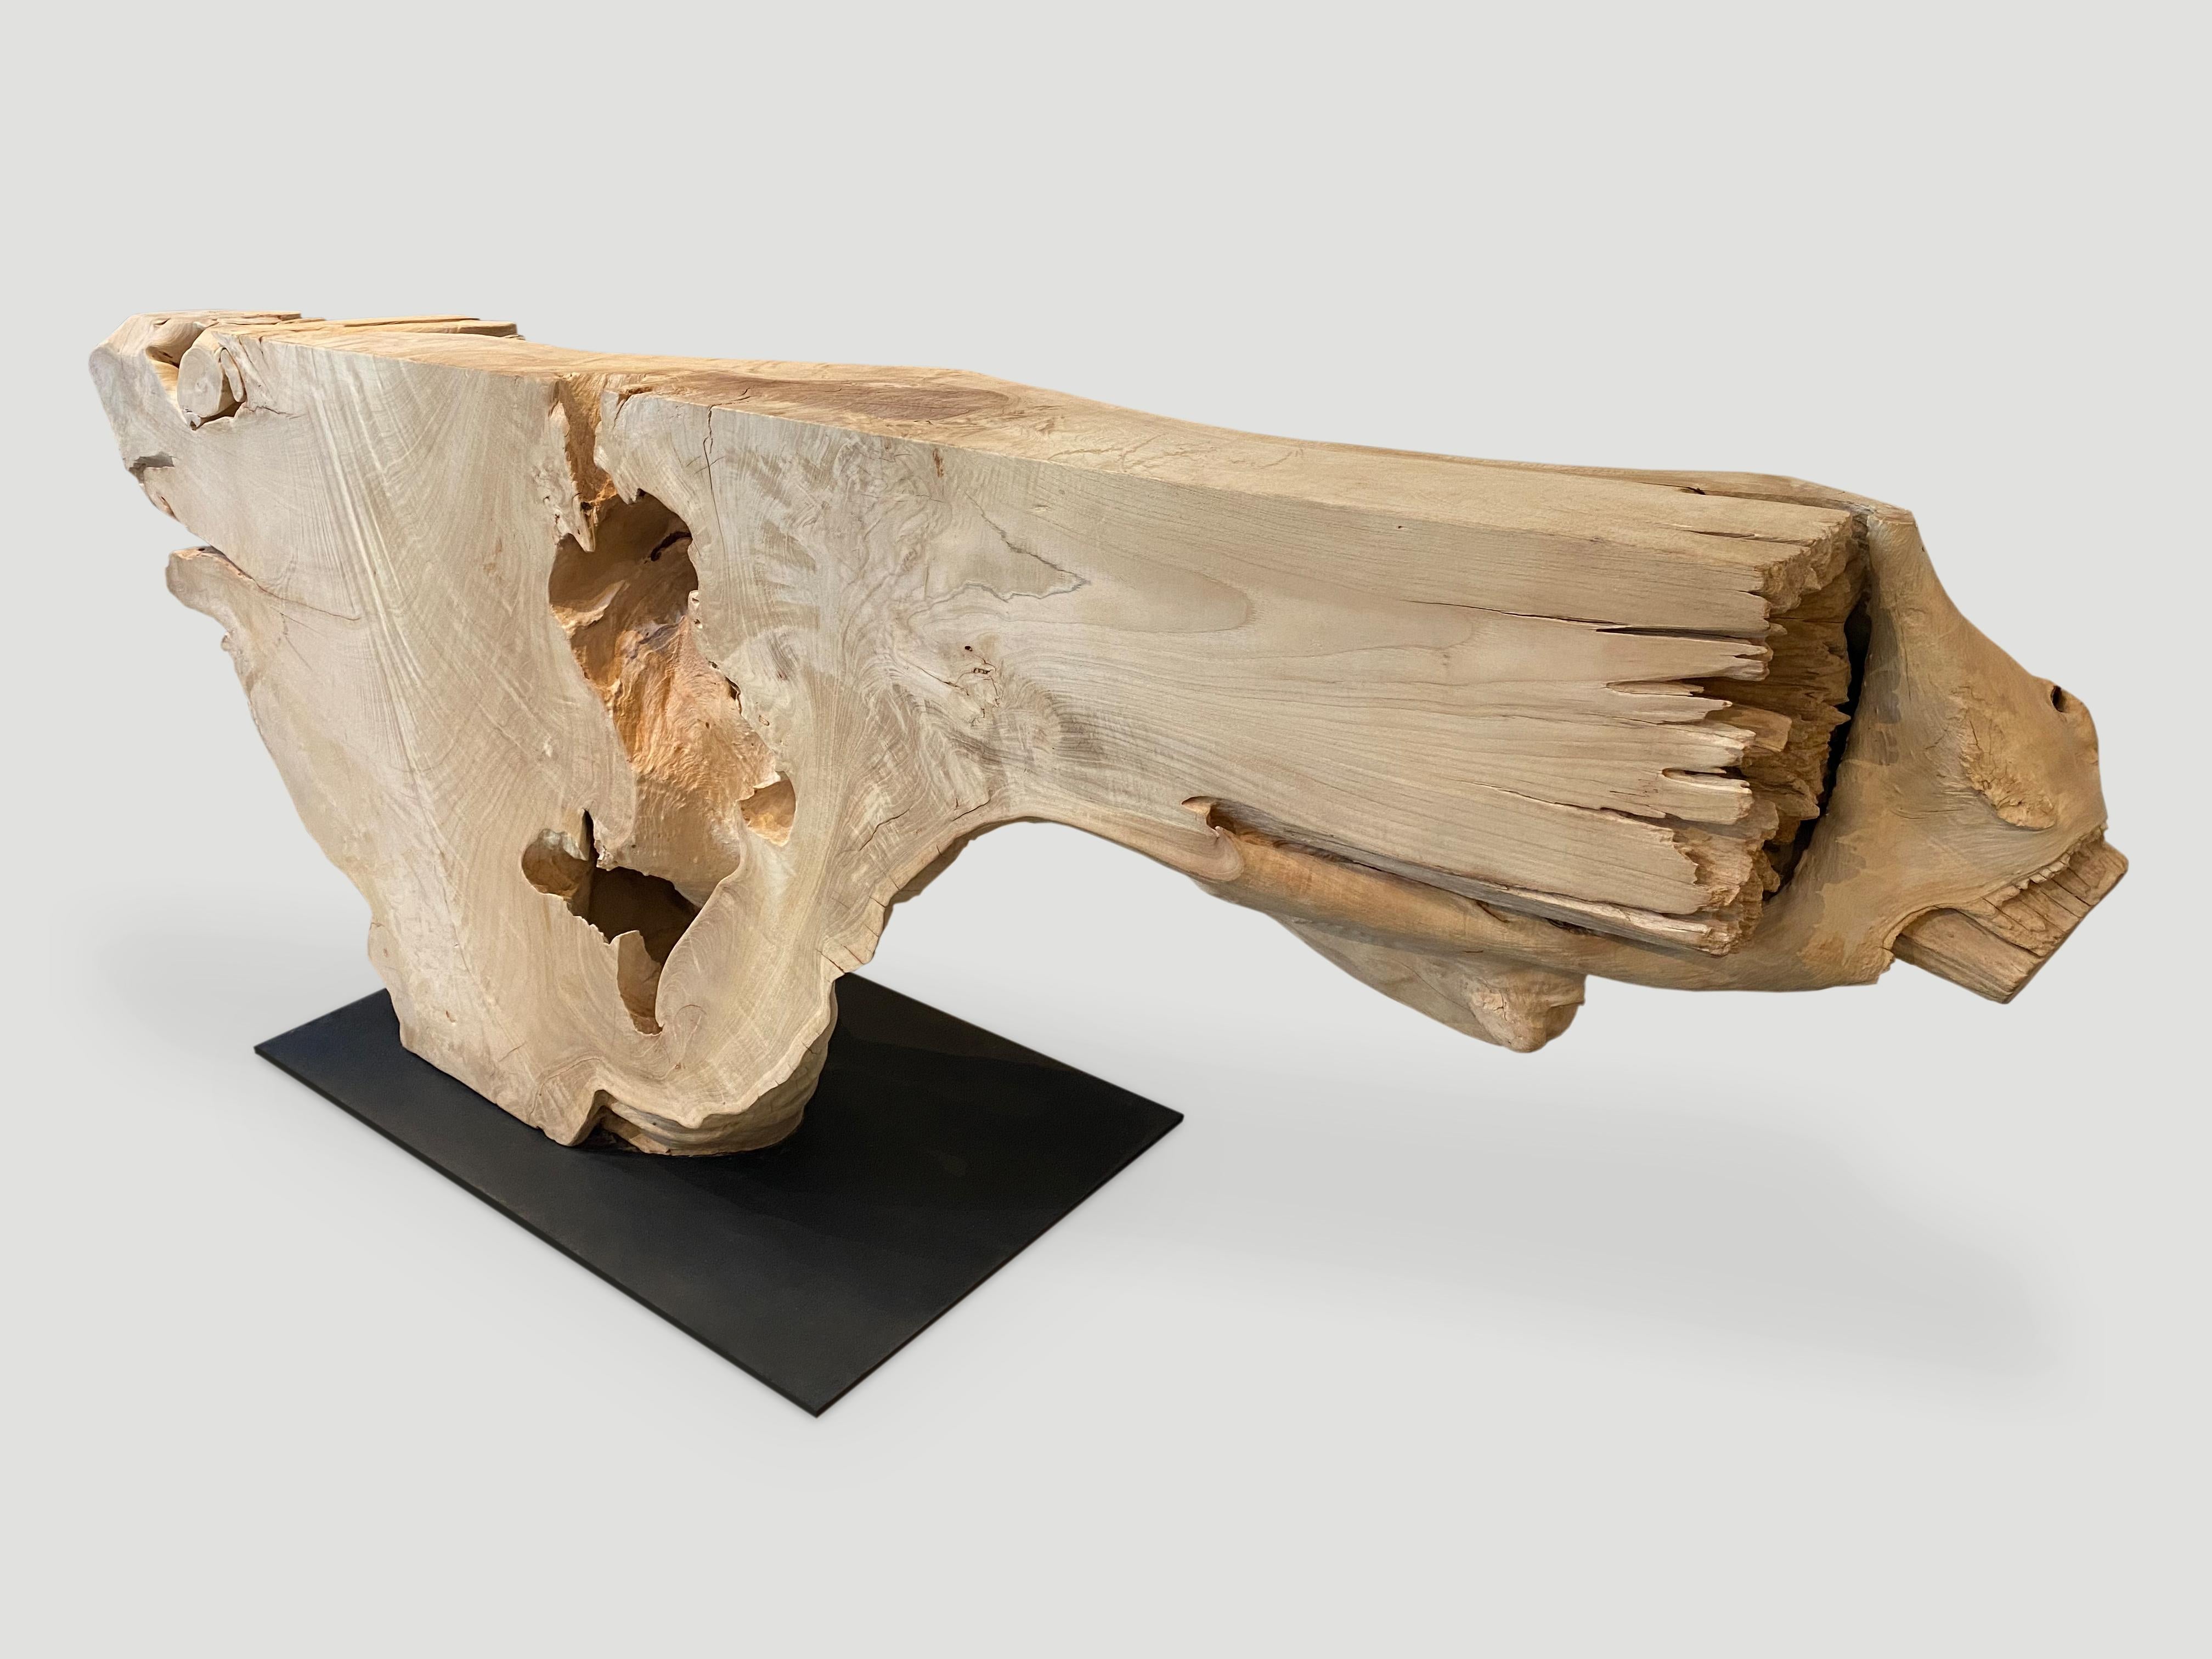 Massive, natural organic formed console table made from a hundred year old teak root. Perfect for a hotel entrance, restaurant or residence. The reclaimed teak is bleached and left to bake in the sun and sea salt air for over a year to achieve this